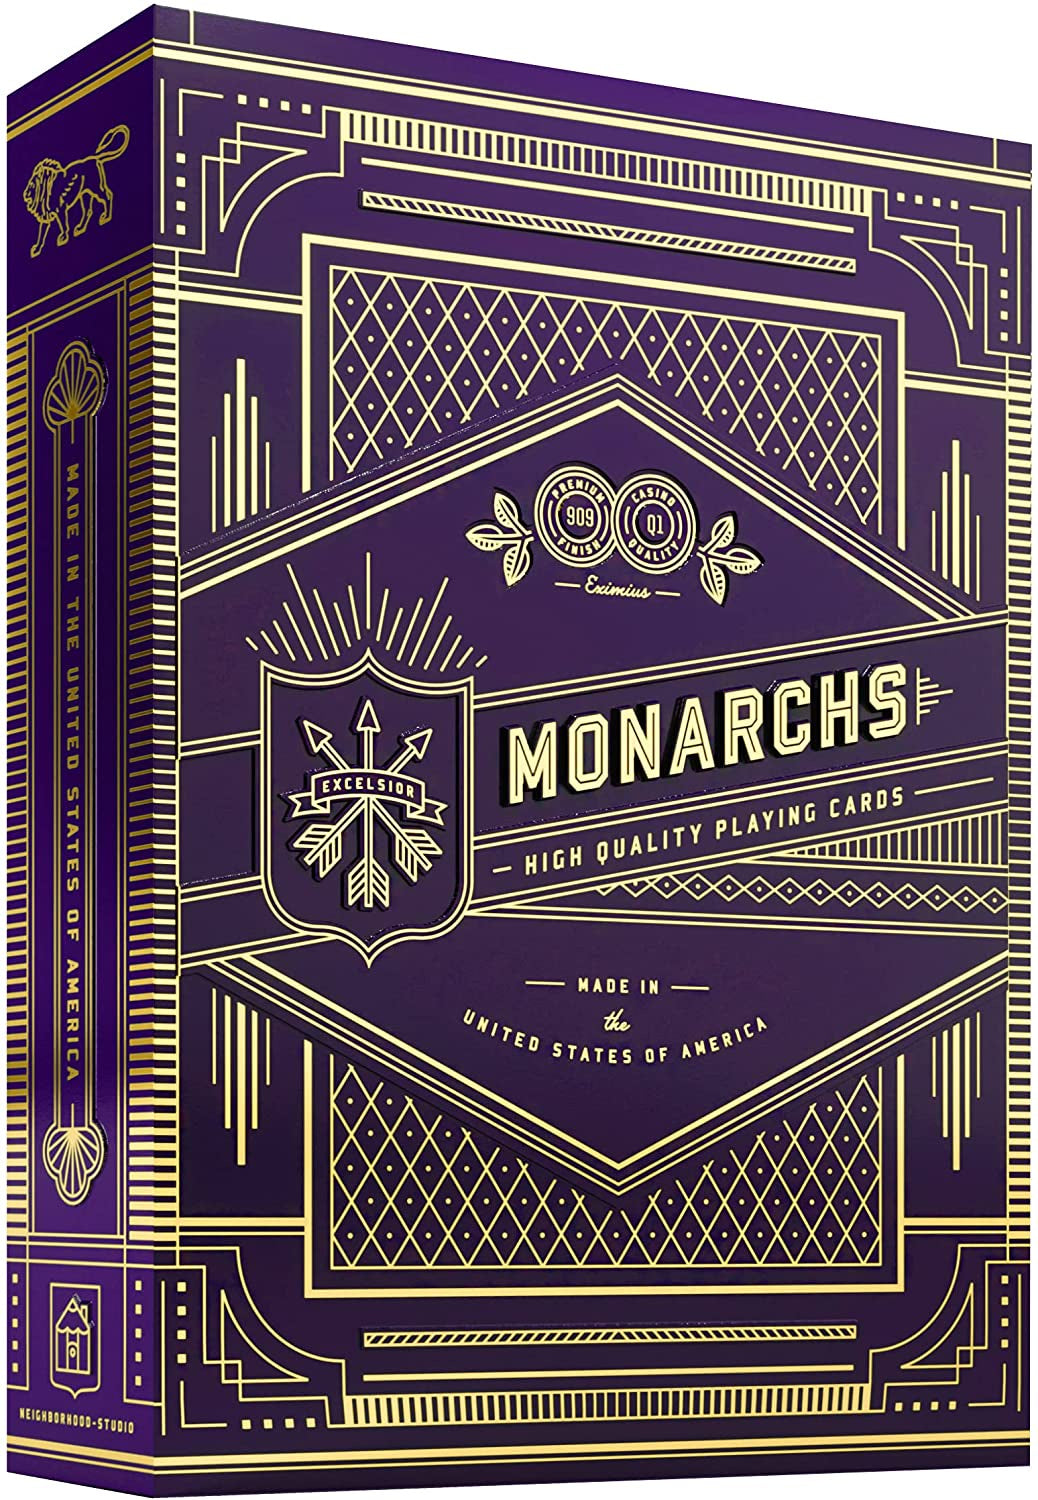 Theory 11 Monarch Playing Cards